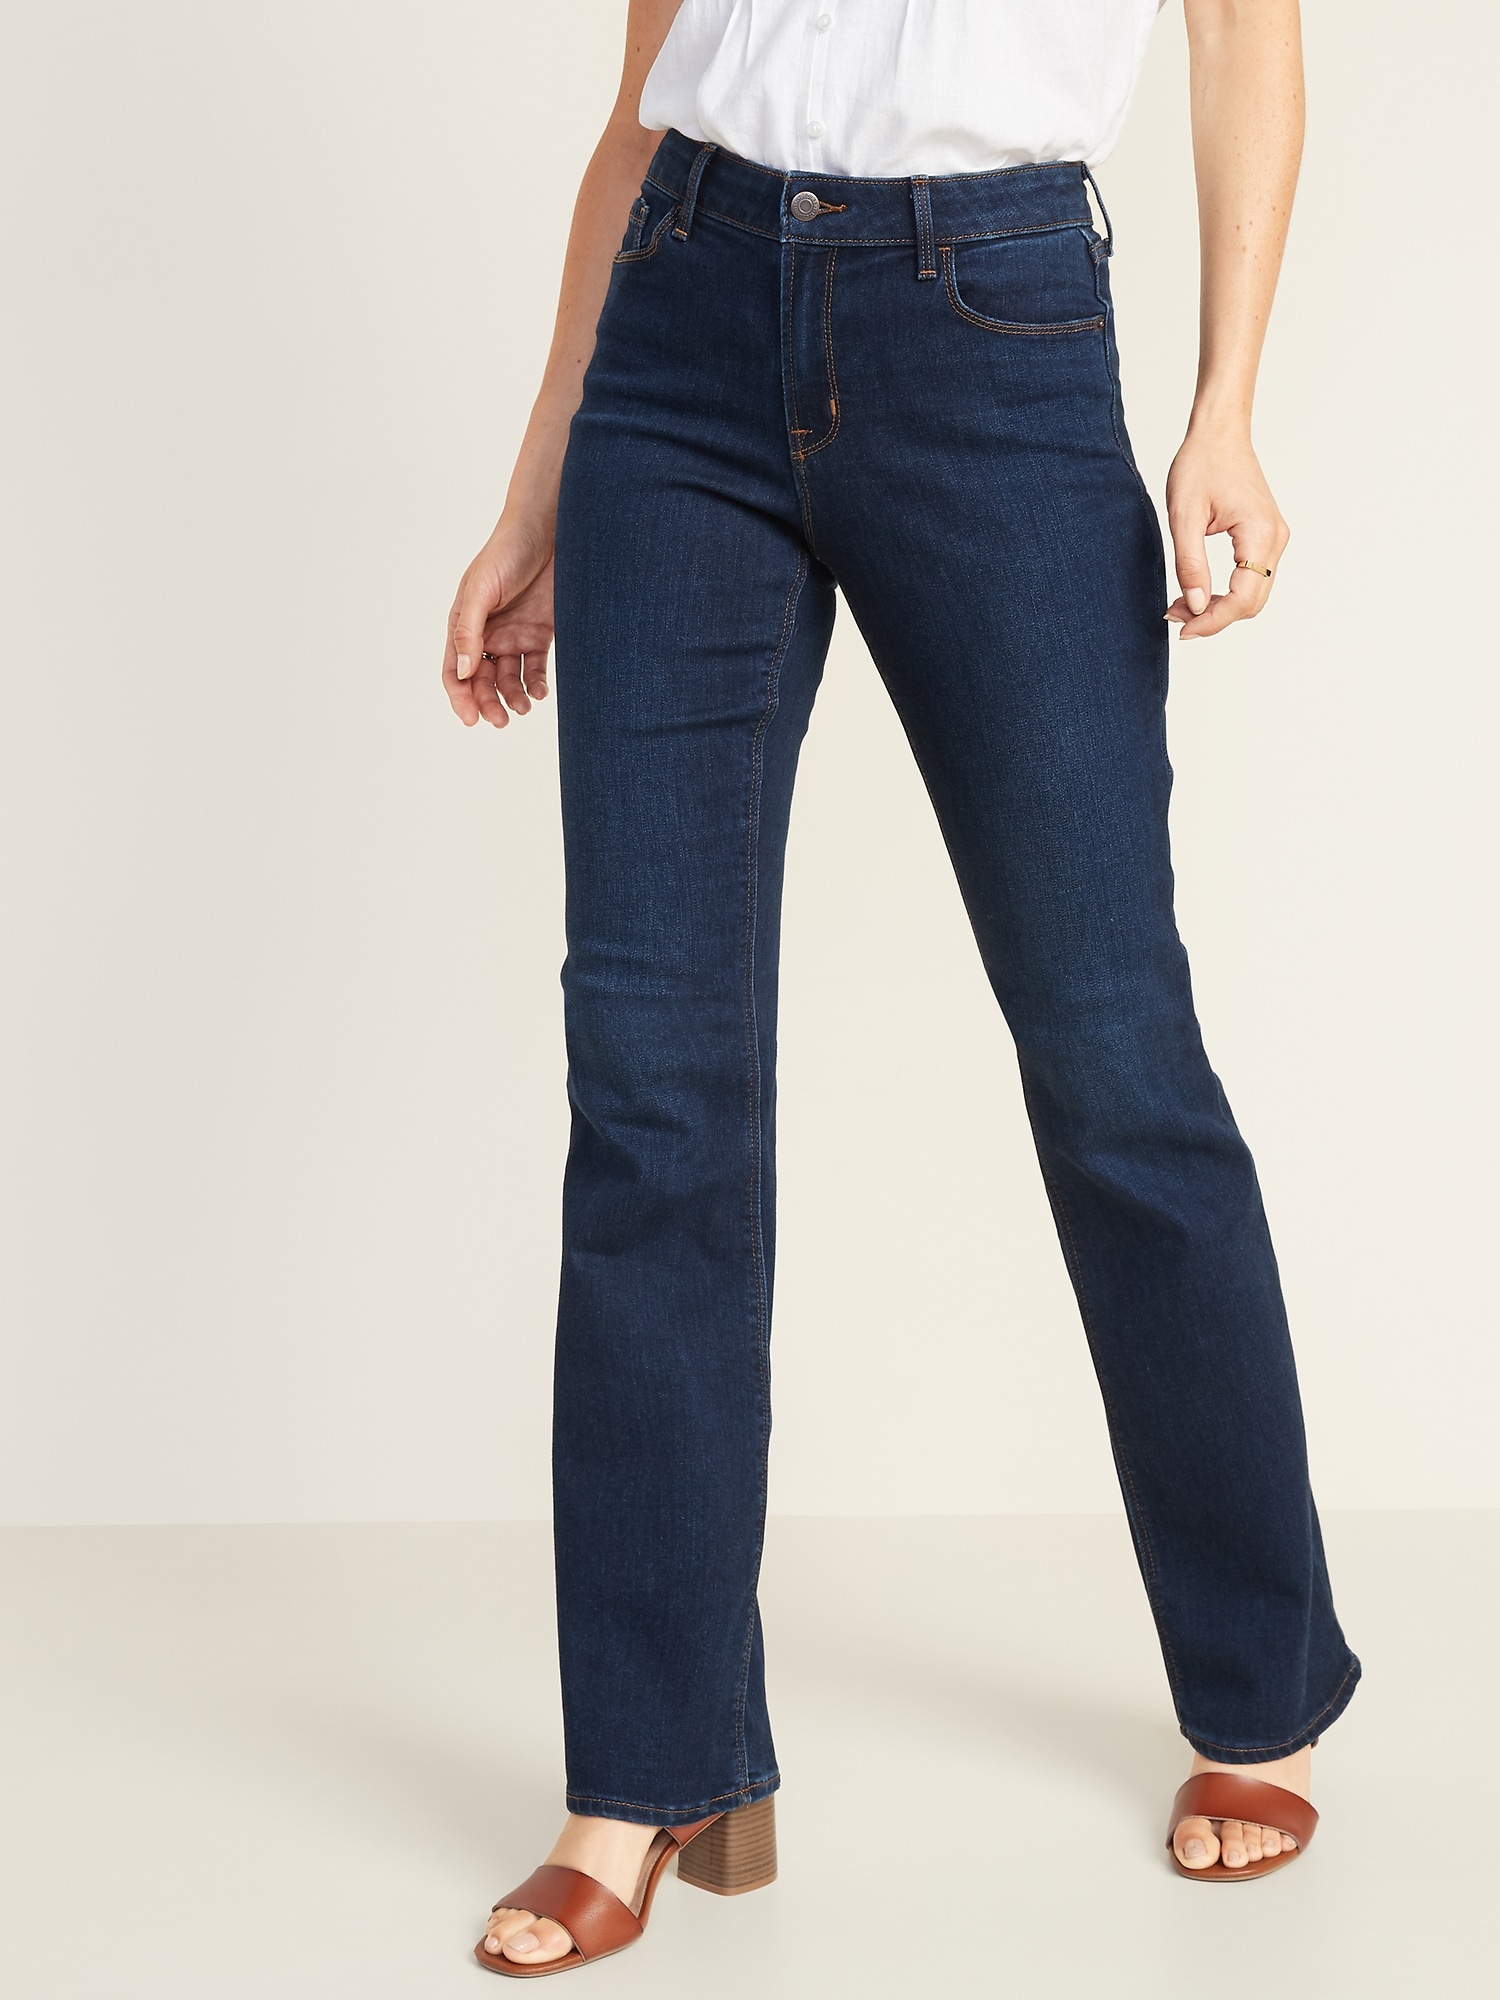 high waisted bell bottom jeans old navy